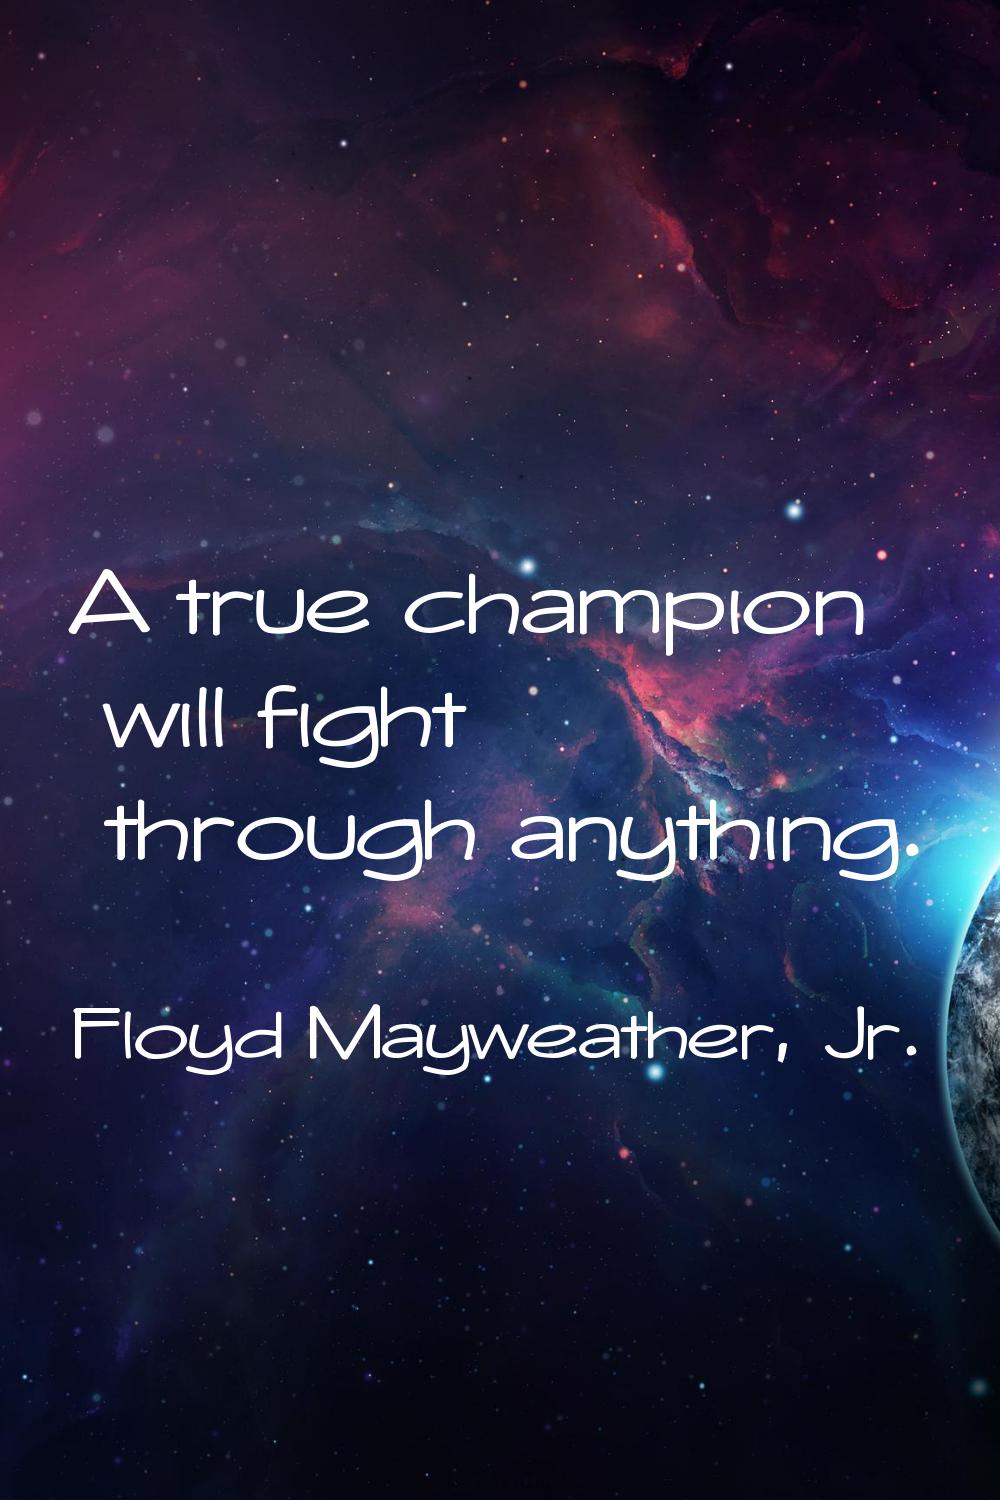 A true champion will fight through anything.